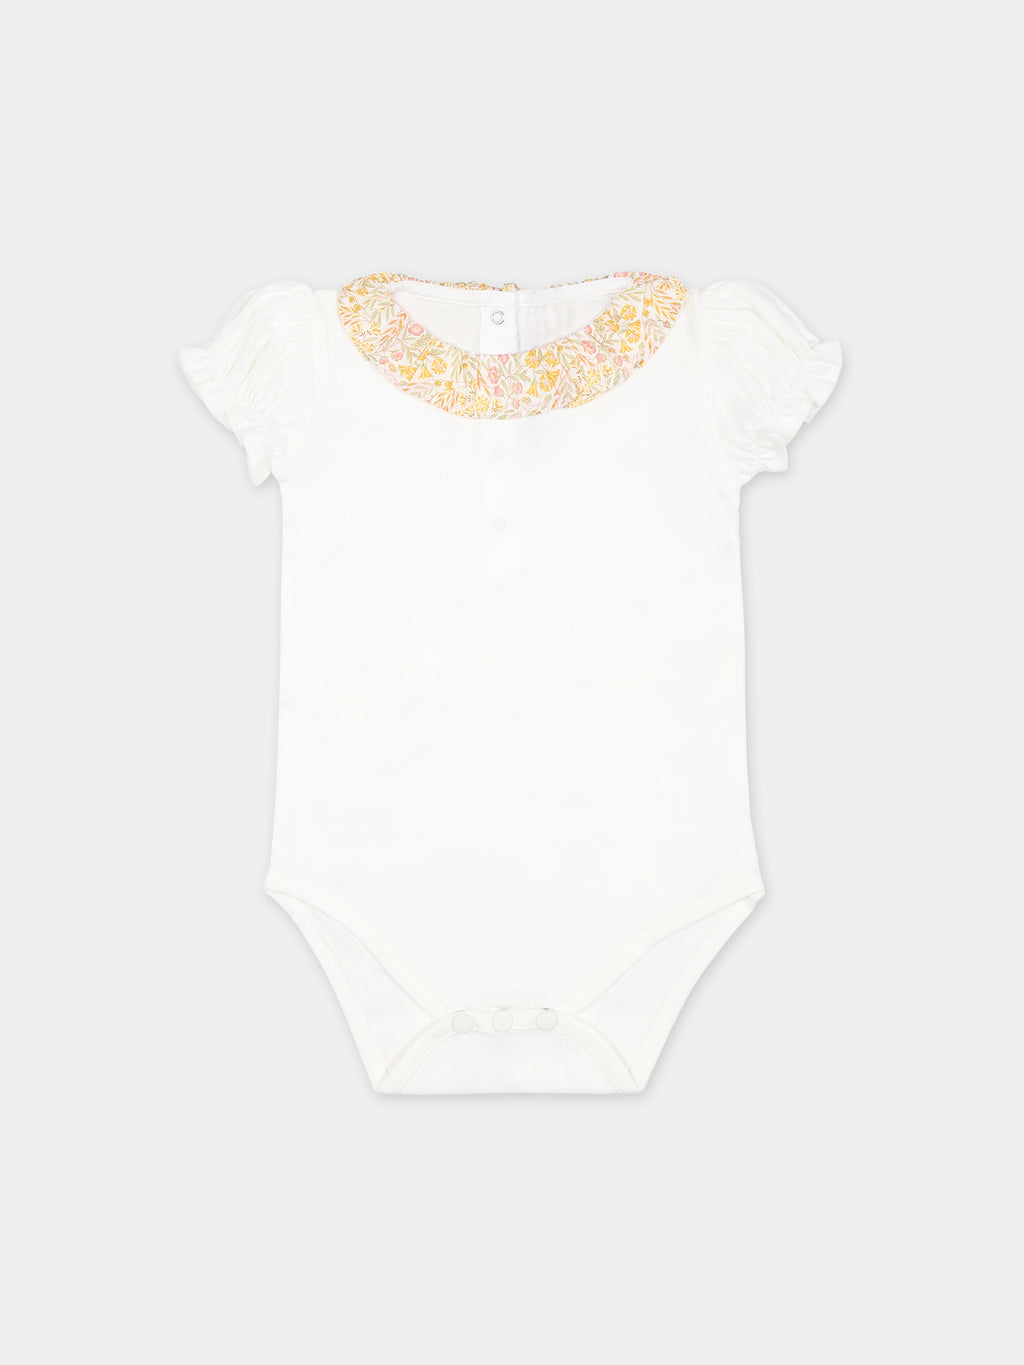 White bodysuit for baby girl with Liberty fabric